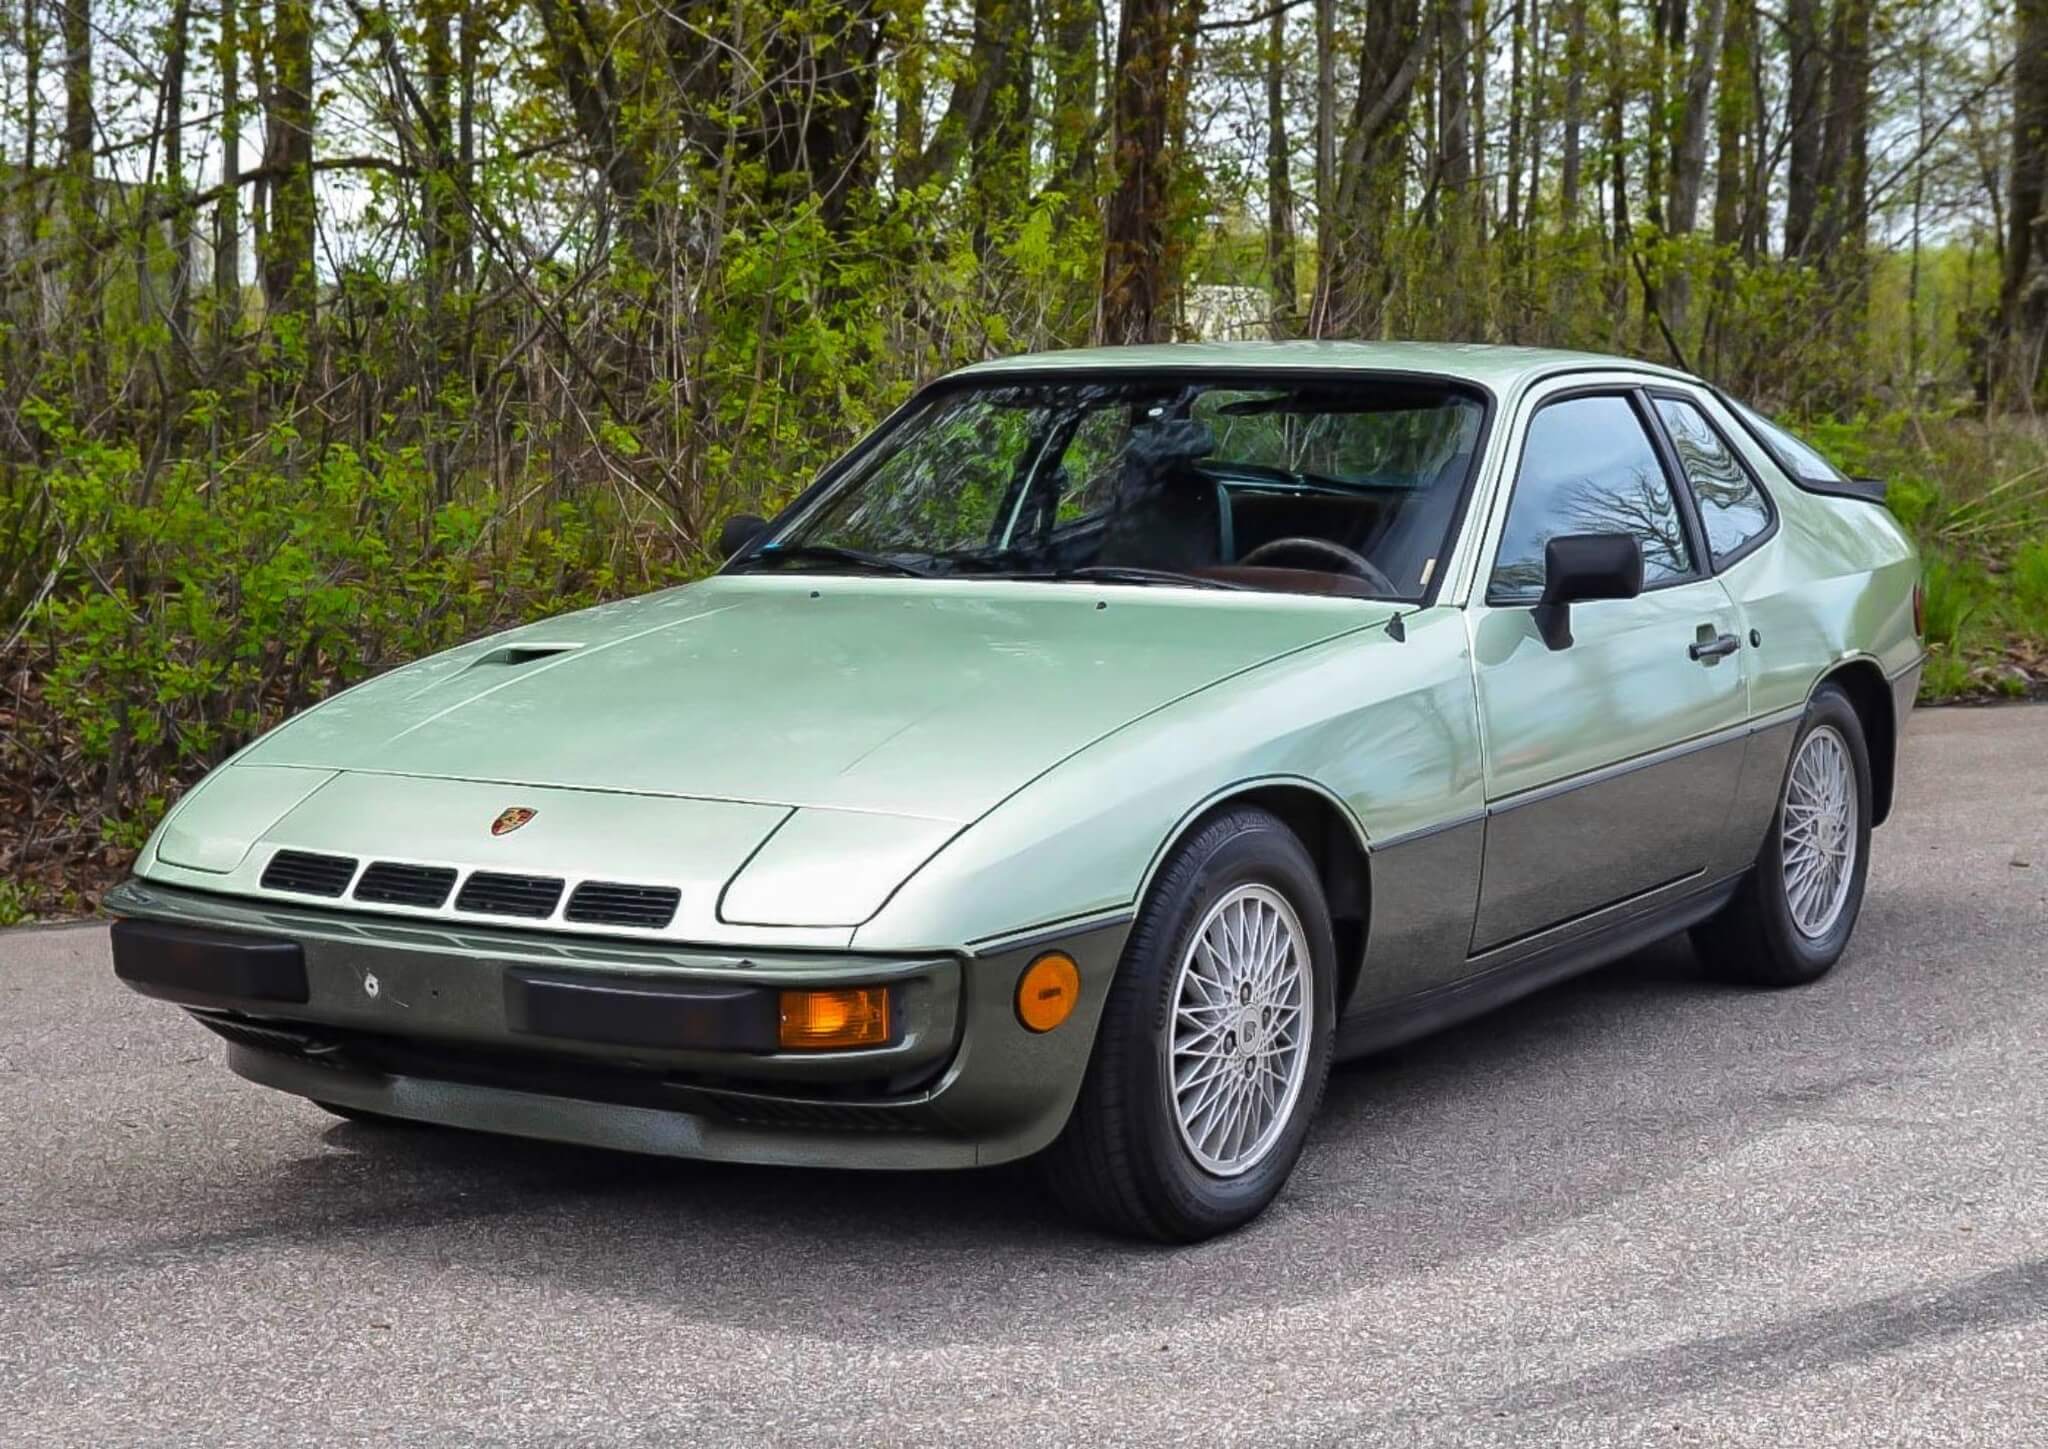 1980 Porsche 924 Turbo Technical Specifications